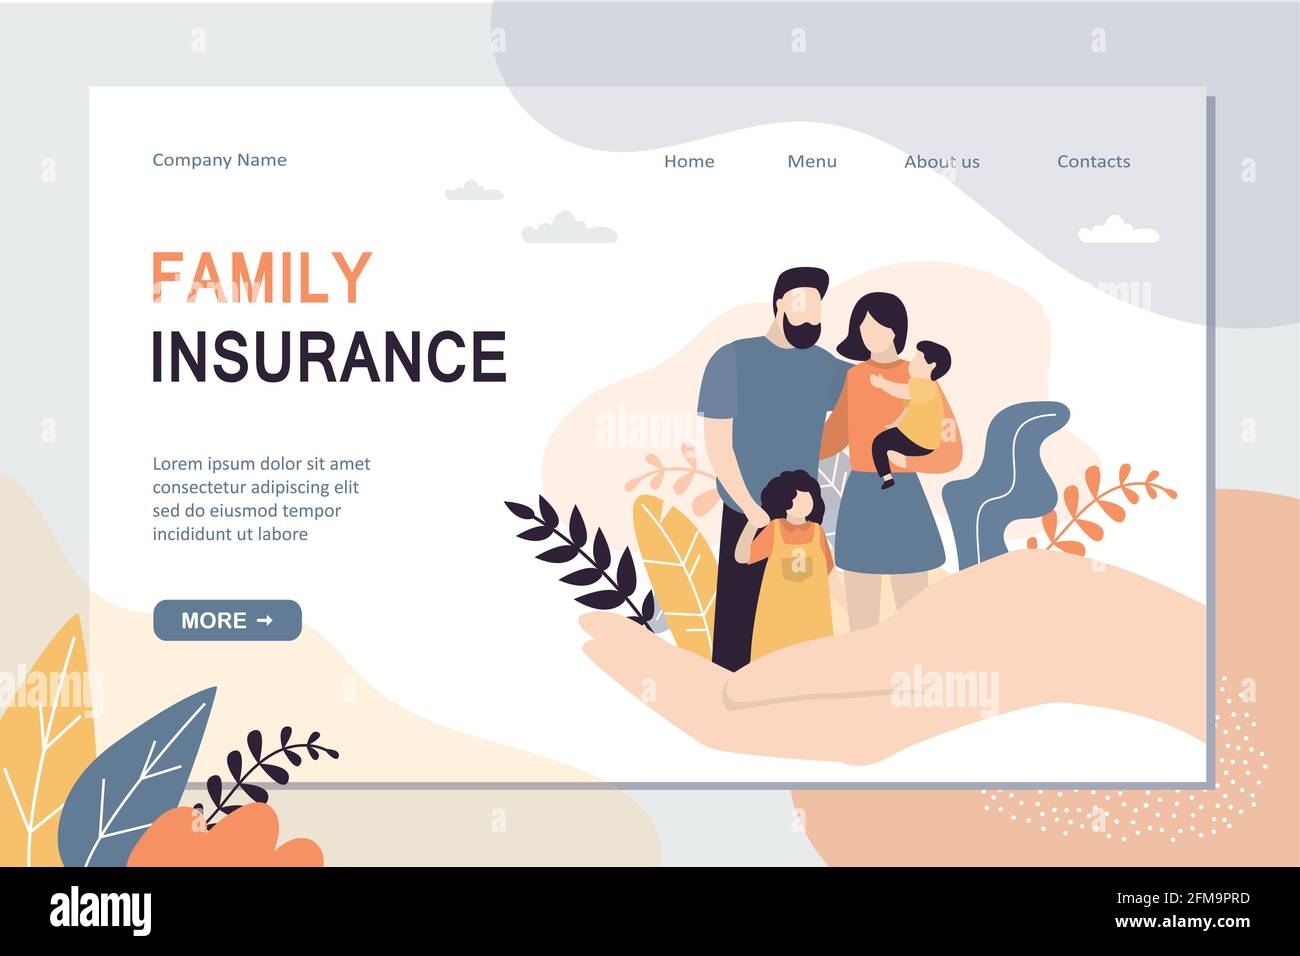 Family Insurance and healthcare landing page template. Big hand holding tiny people with children. Medical or financial assurance banner. Love couple Stock Vector